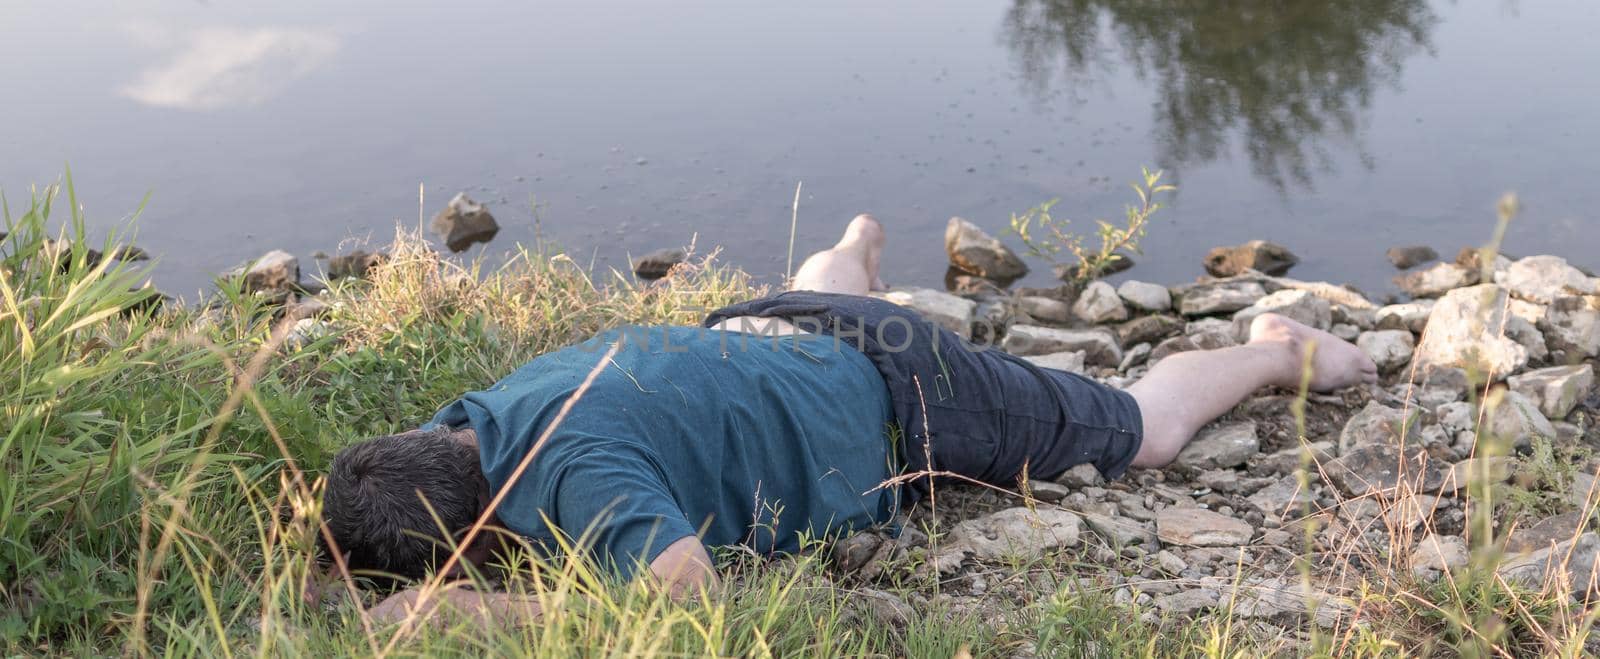 a lifeless dead body lies on the shore of a lake, a young man killed by water by studeg83